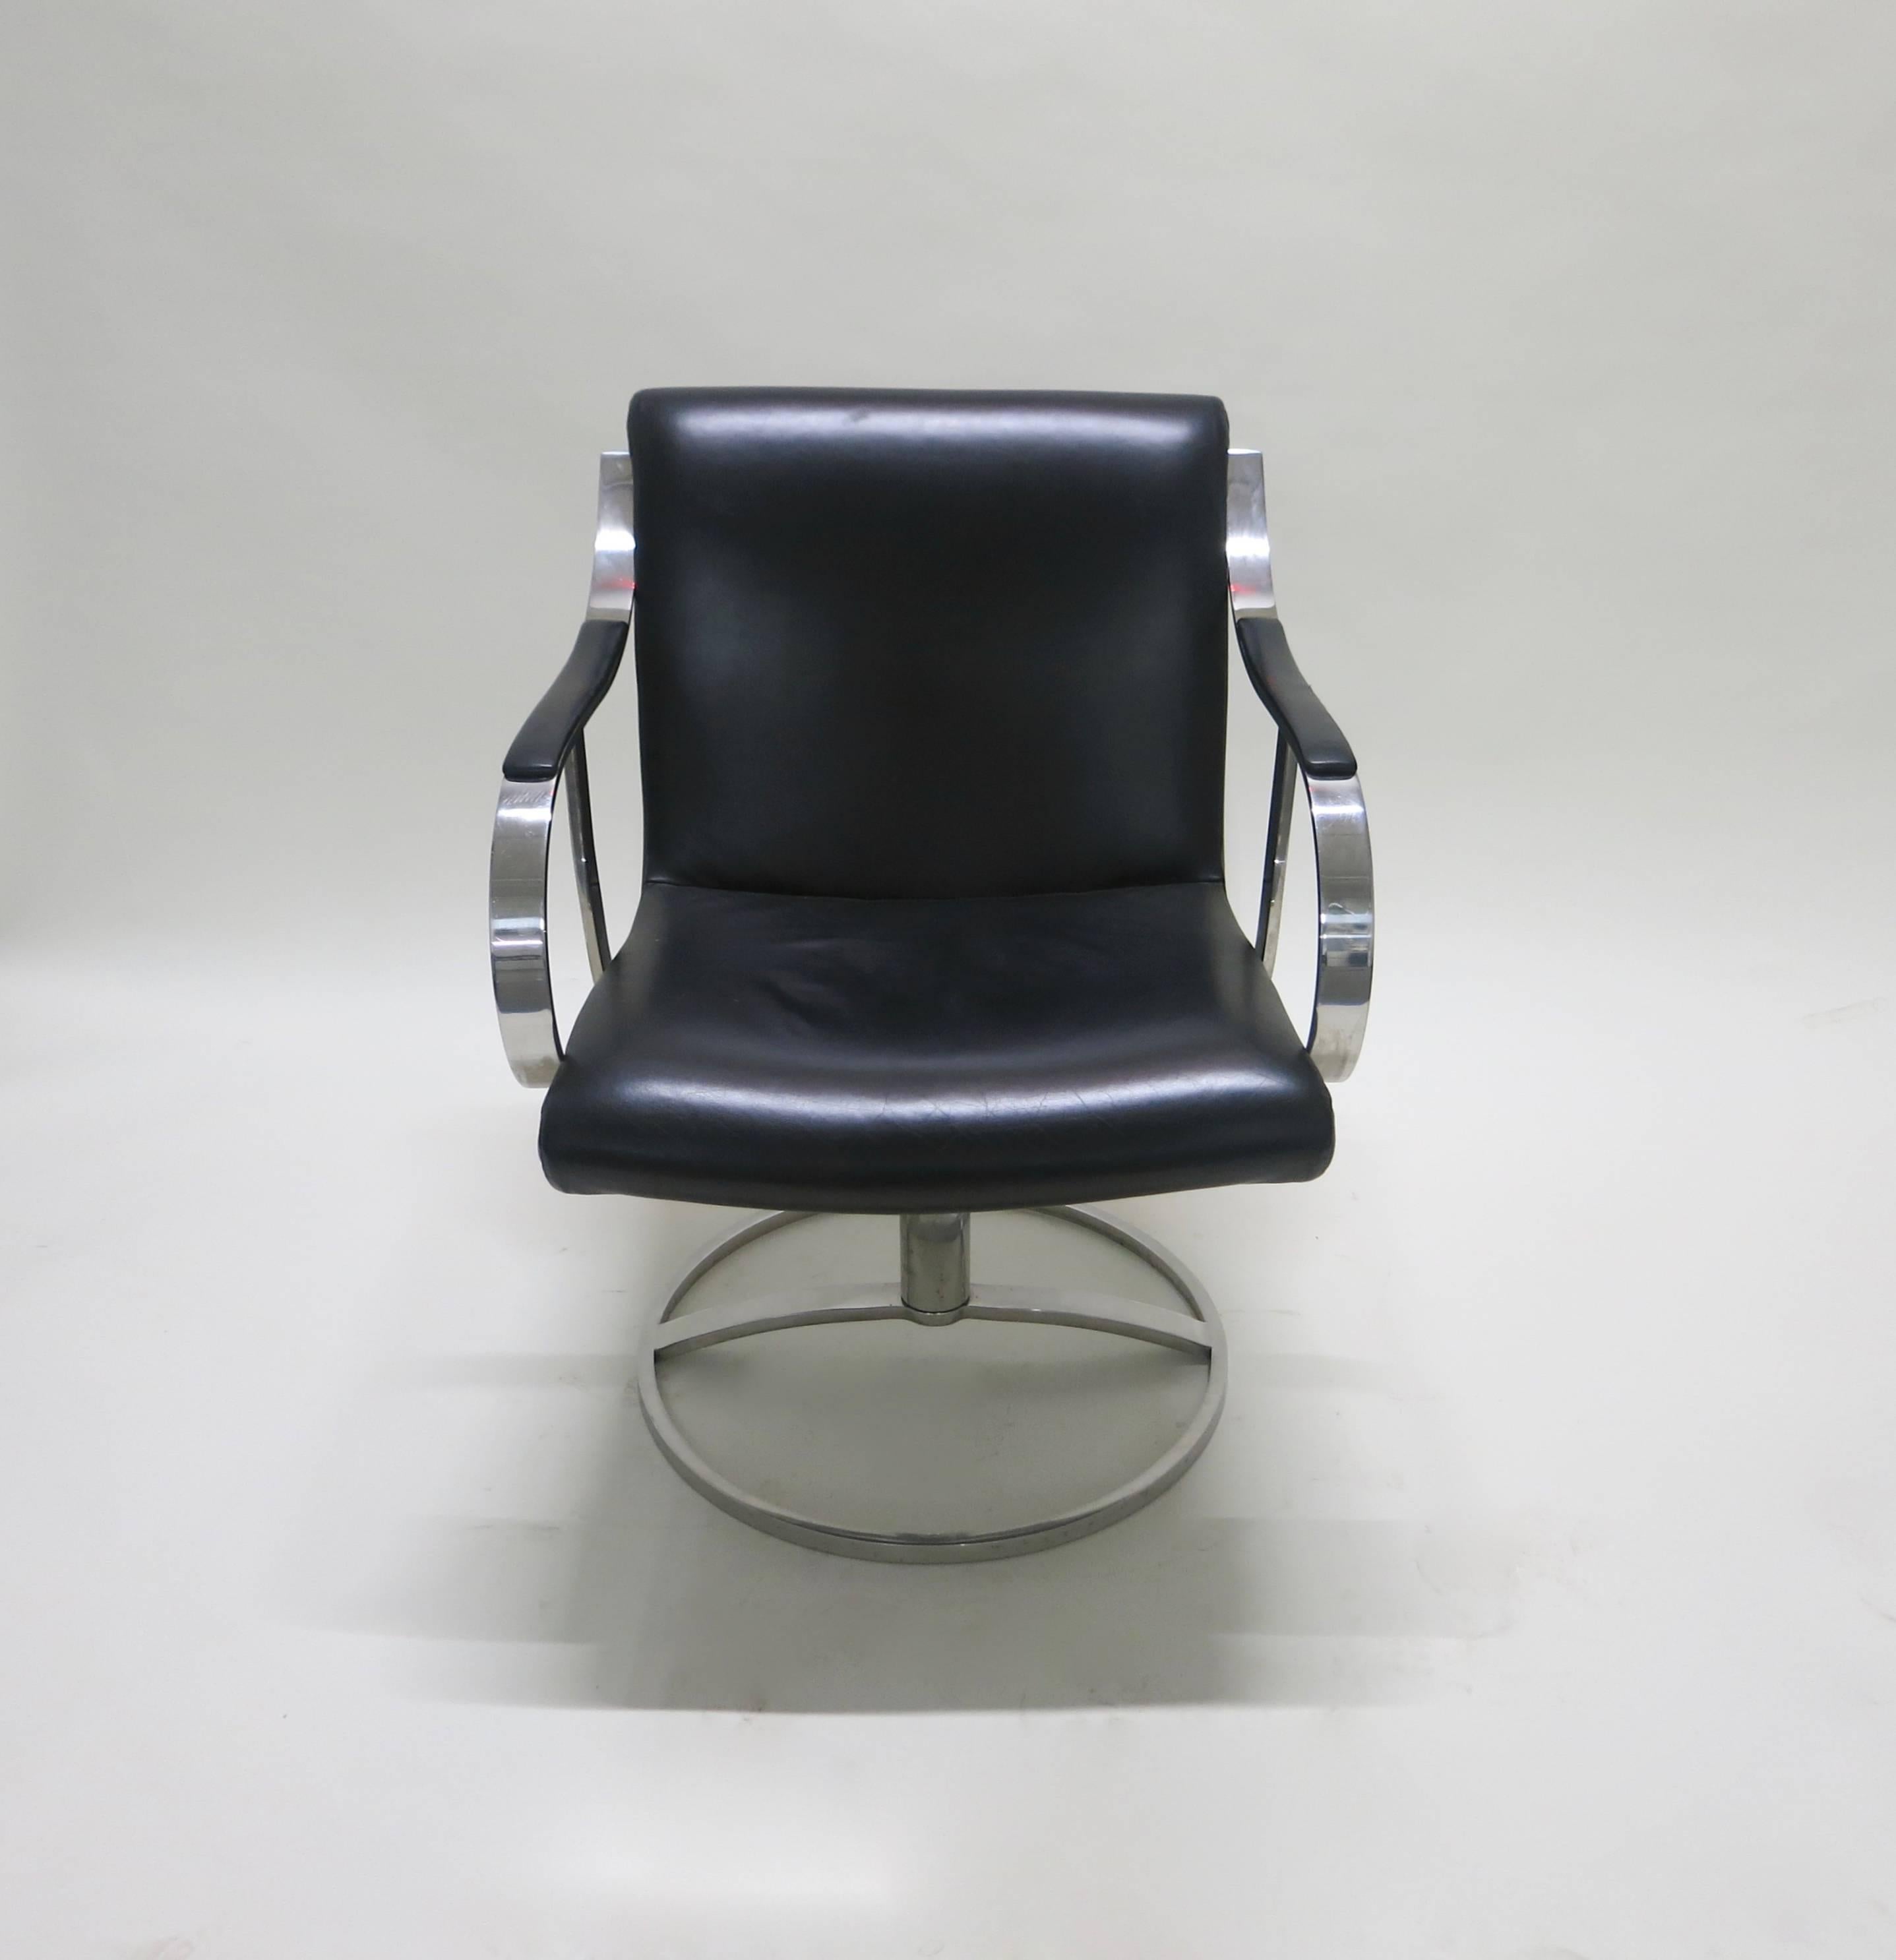 Pair of chairs have a solid polished steel frame with original black leather. The round base is solid, heavy, and sturdy. Chairs are great original condition.
Two larger lounge chairs and coffee table Available in separate listings.